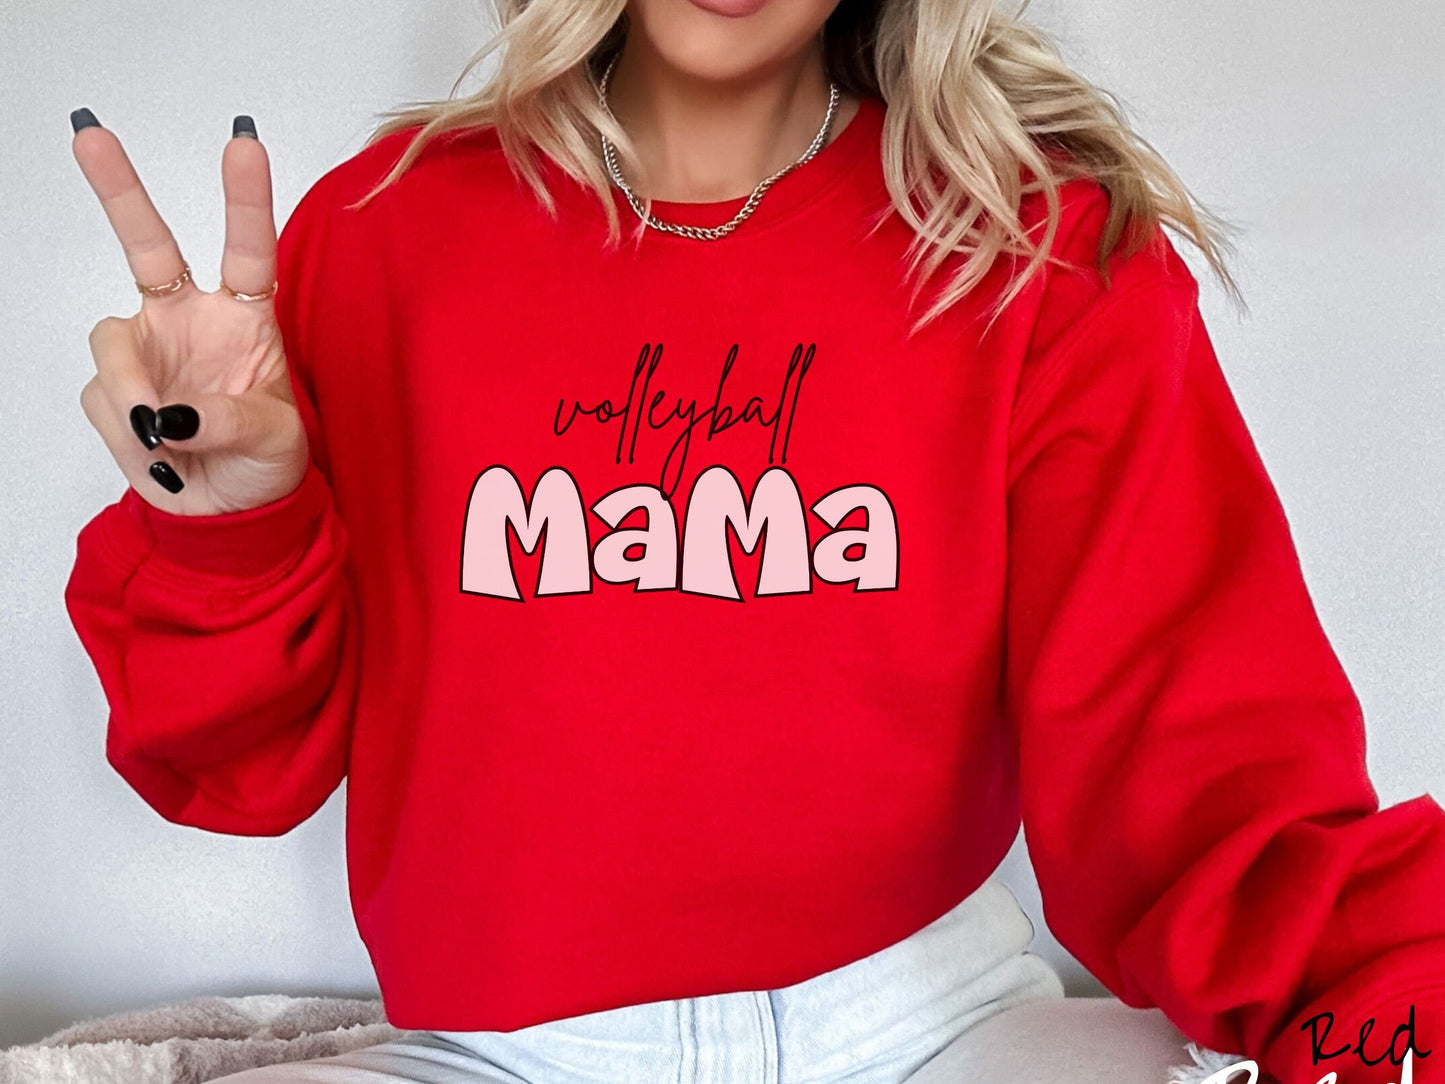 A woman wearing a cute, vintage red colored sweatshirt with the word volleyball across the front in black, undercase cursive writing. Below that is the word Mama in large, white font.